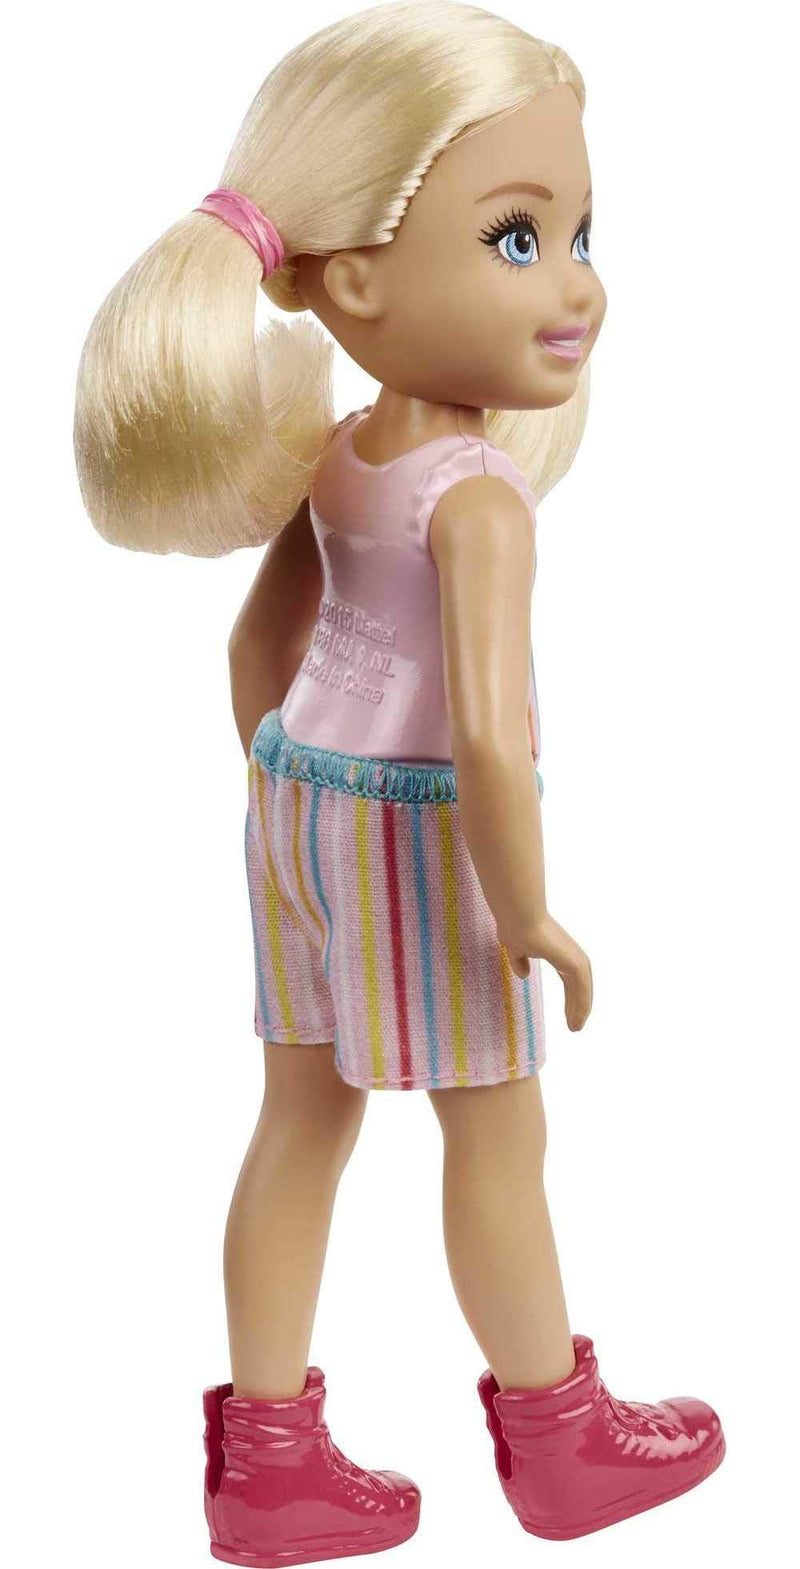 Barbie Chelsea Doll (6-inch Blonde) Wearing Skirt with Striped Print and Pink Boots